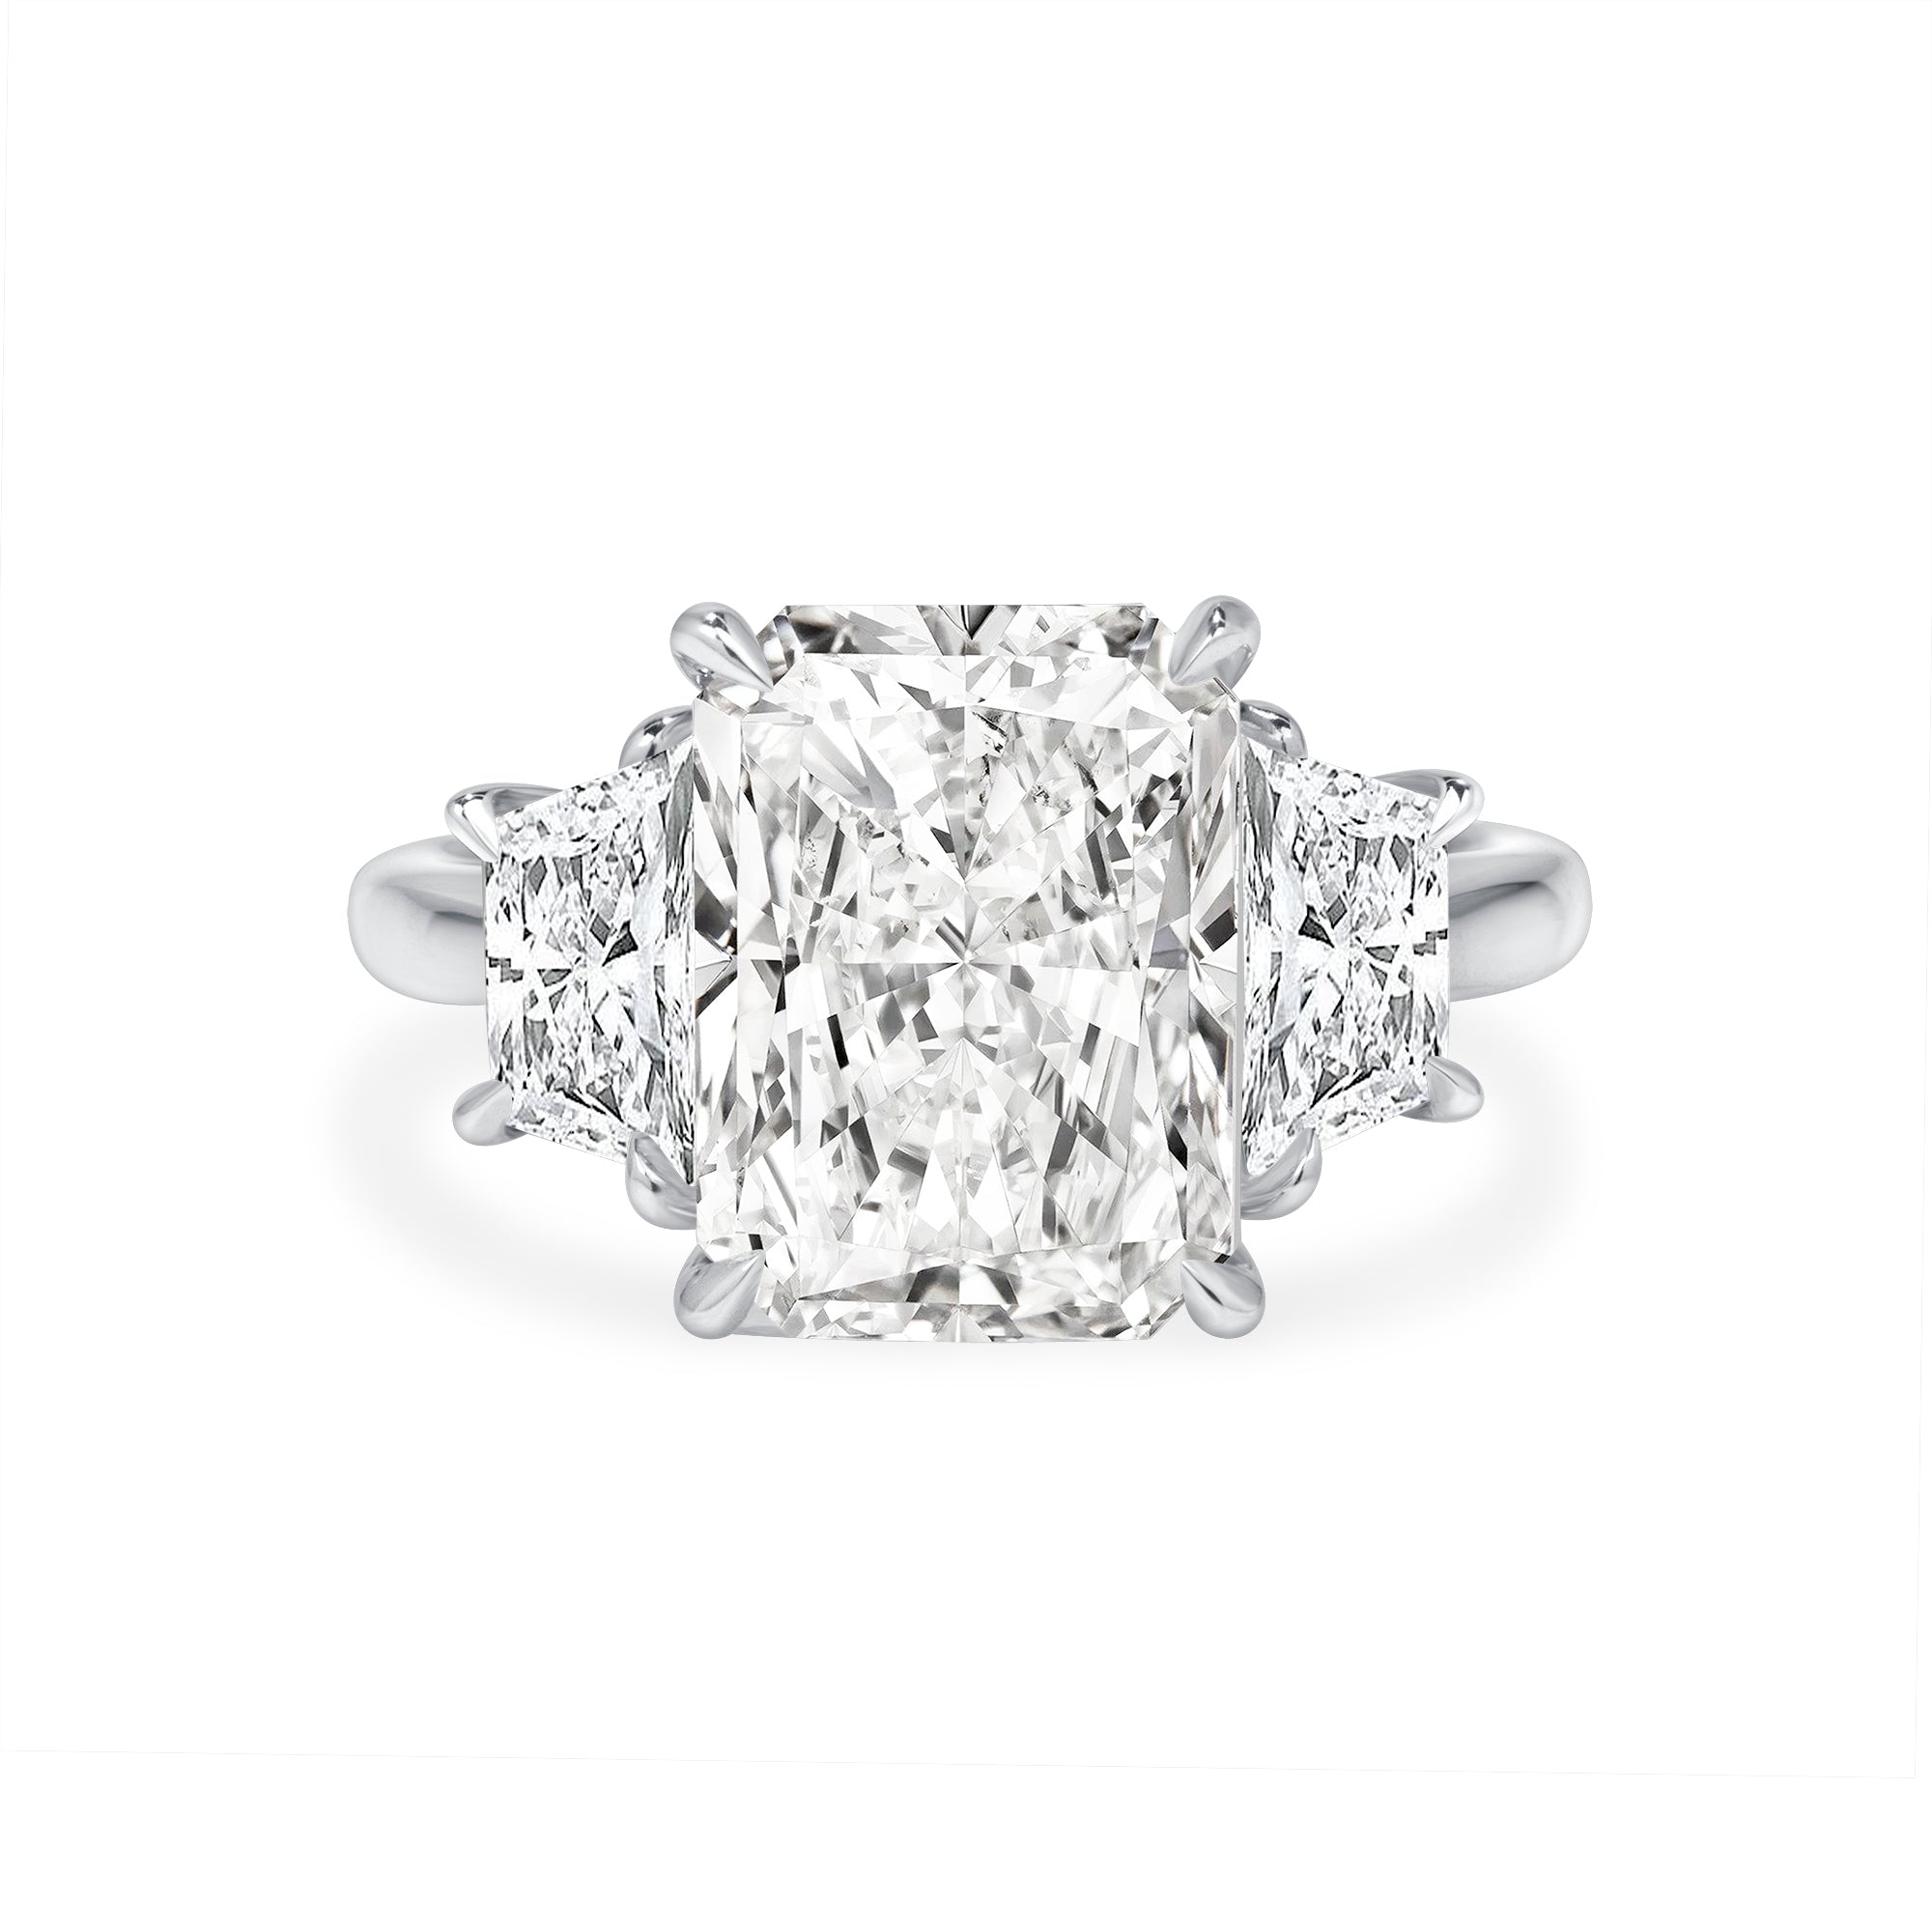 5.01ct Radiant Cut Diamond Three Stone Ring with Trapezoid Side Stones in Platinum Band, GIA Certified